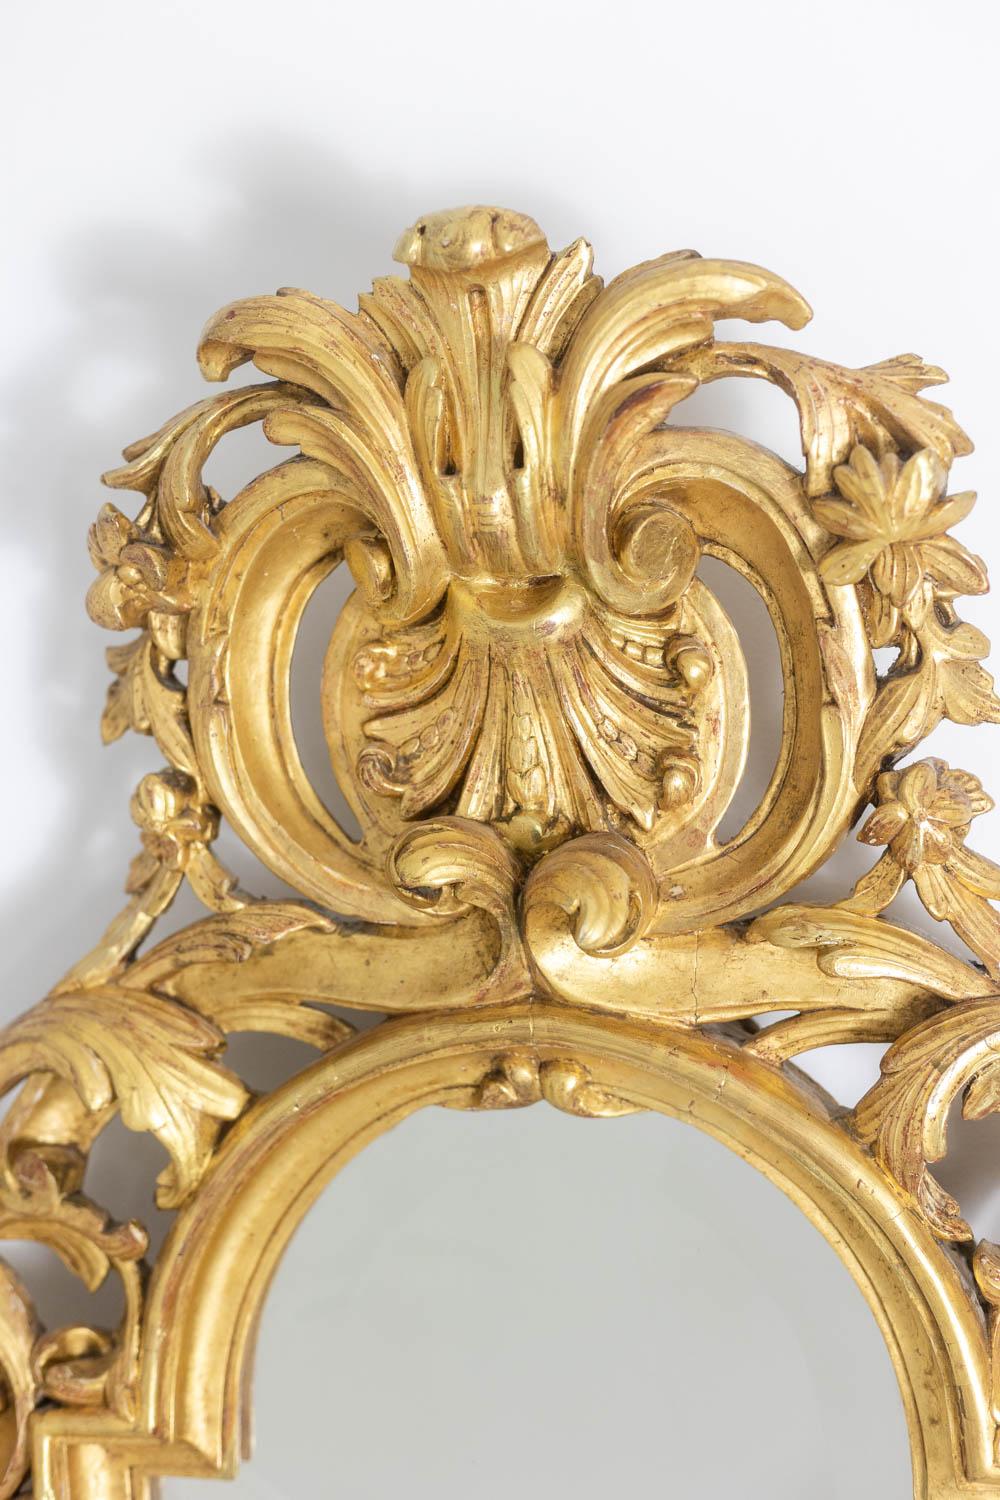 Regency style carved and gilded wooden mirror decorated with acanthus leaves, scrolls and scrolls and violin shape.

French work from the Napoleon III period, circa 1880.

Dimensions: H 100 x W 64 x D 10 cm

Reference: LS553535AD

The Regency style